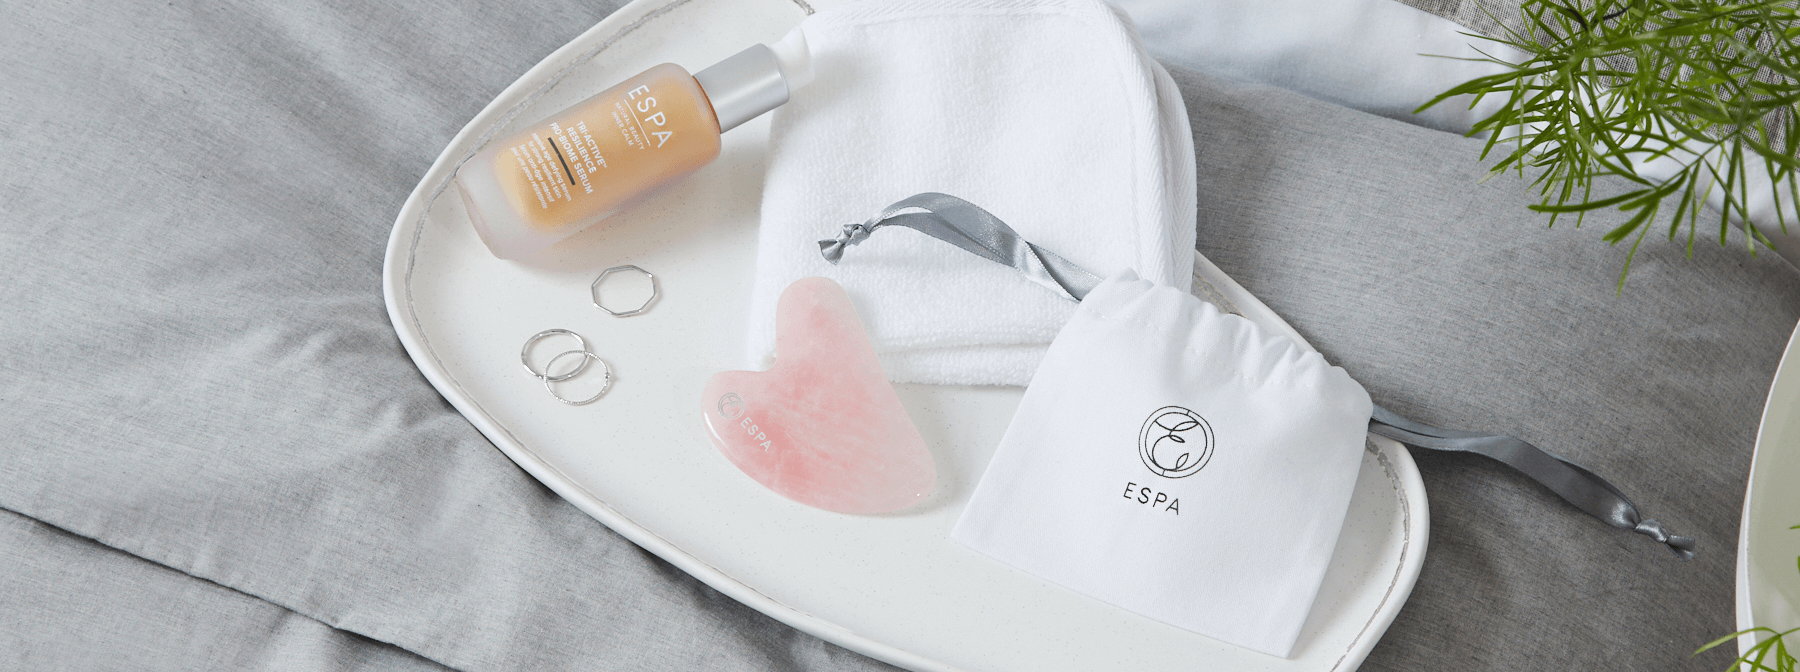 How to Use a Gua Sha on Your Face